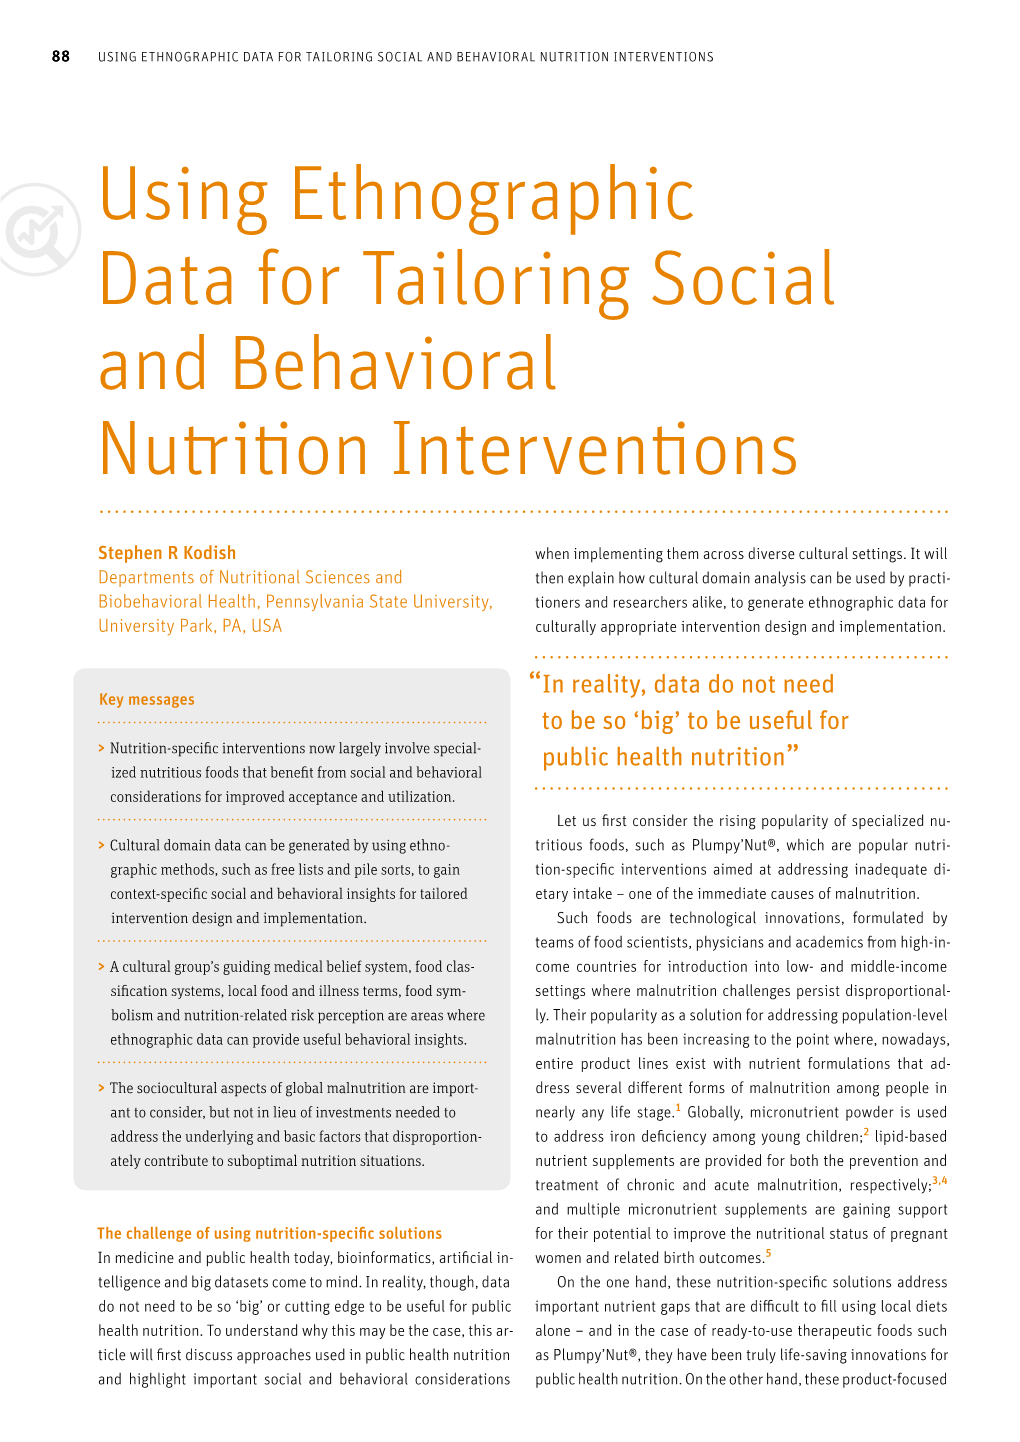 Using Ethnographic Data for Tailoring Social and Behavioral Nutrition Interventions